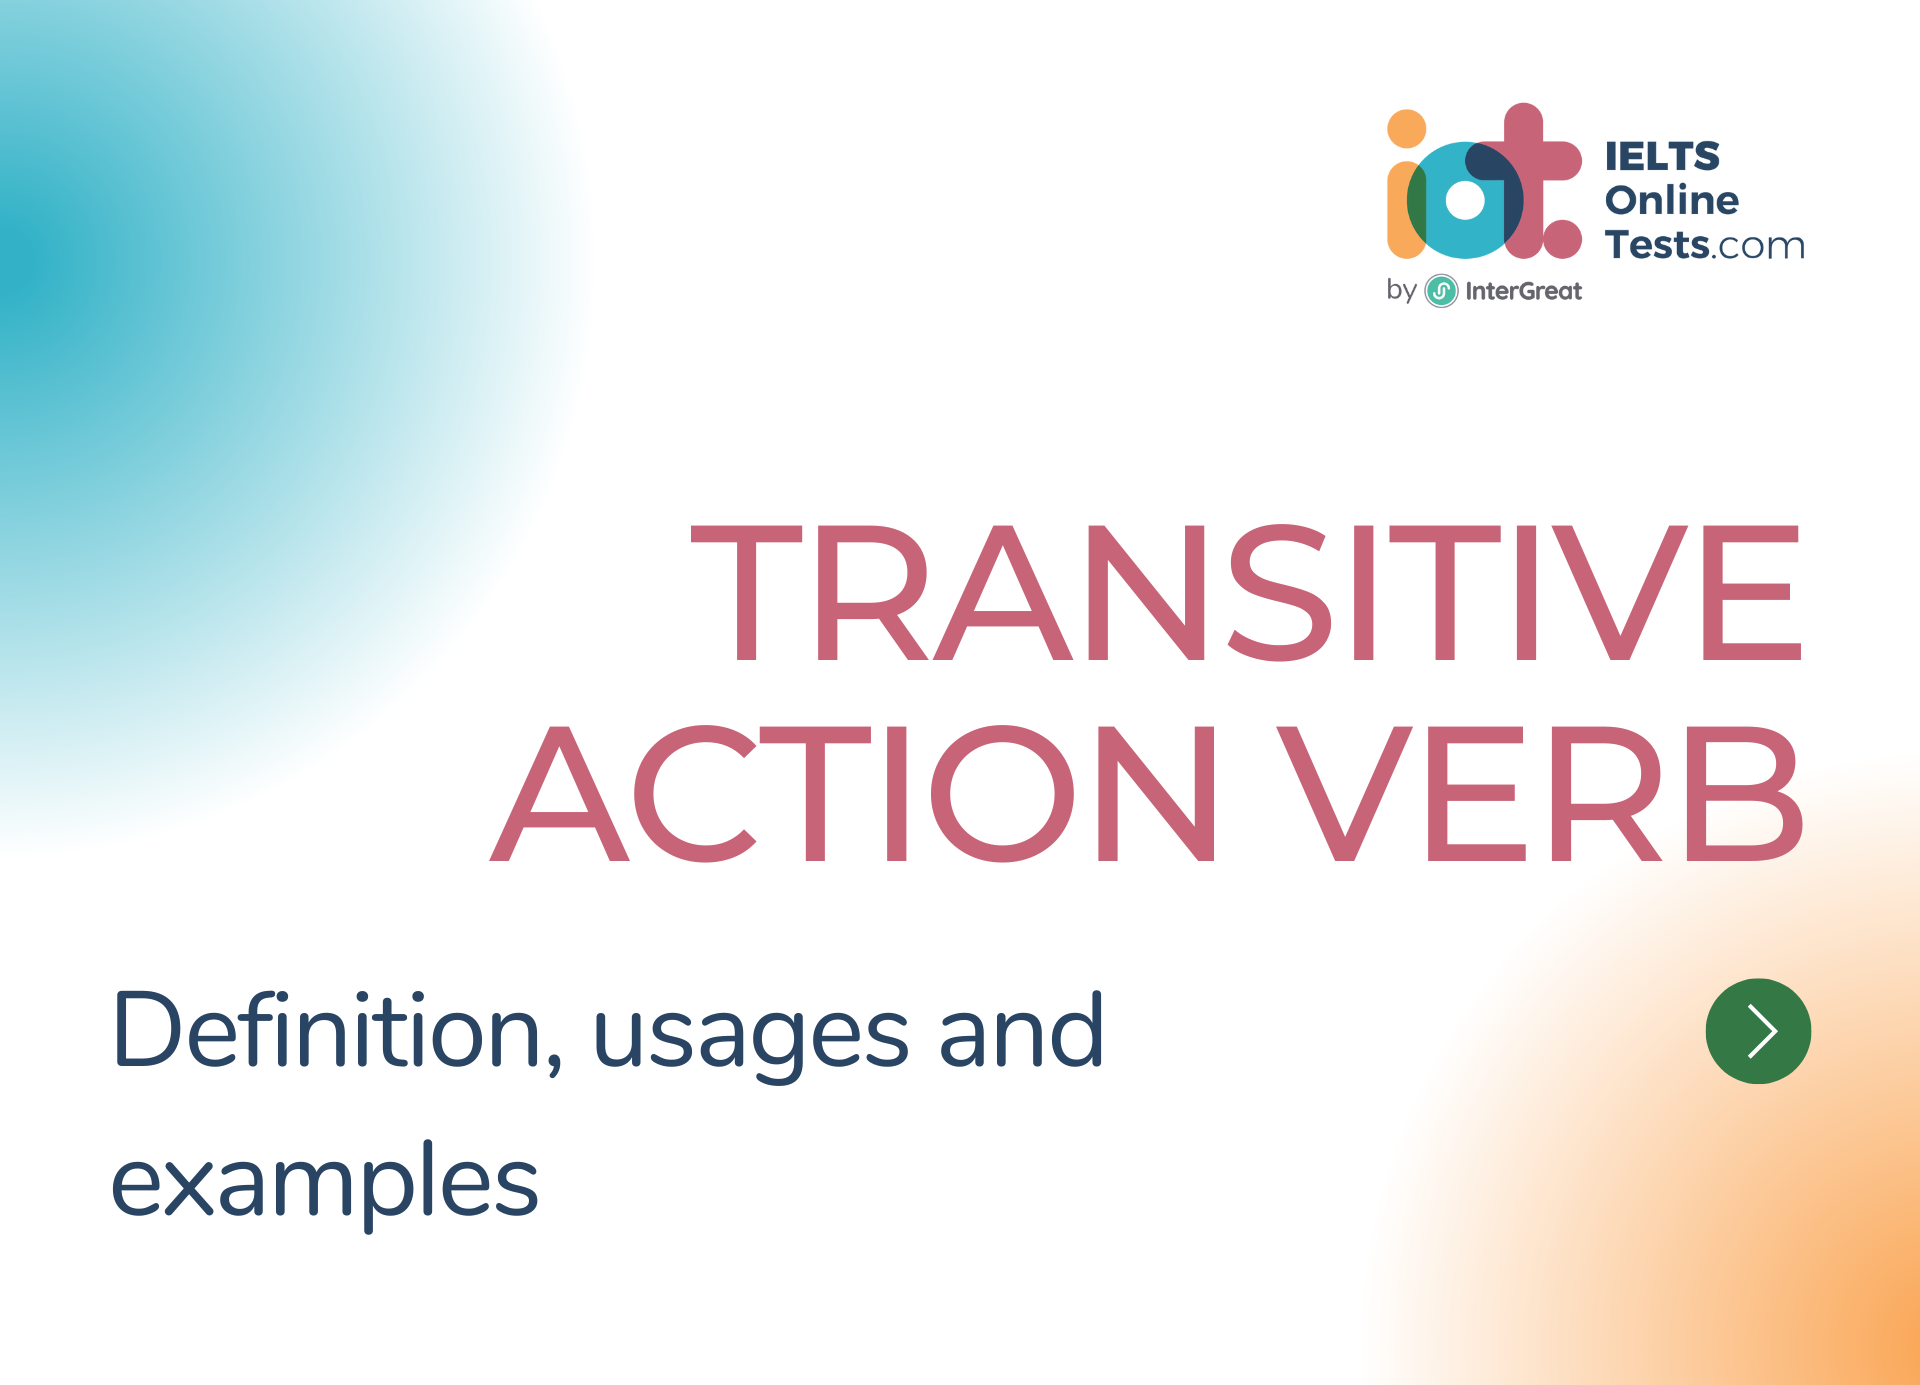 Transitive action verb definition, types and examples